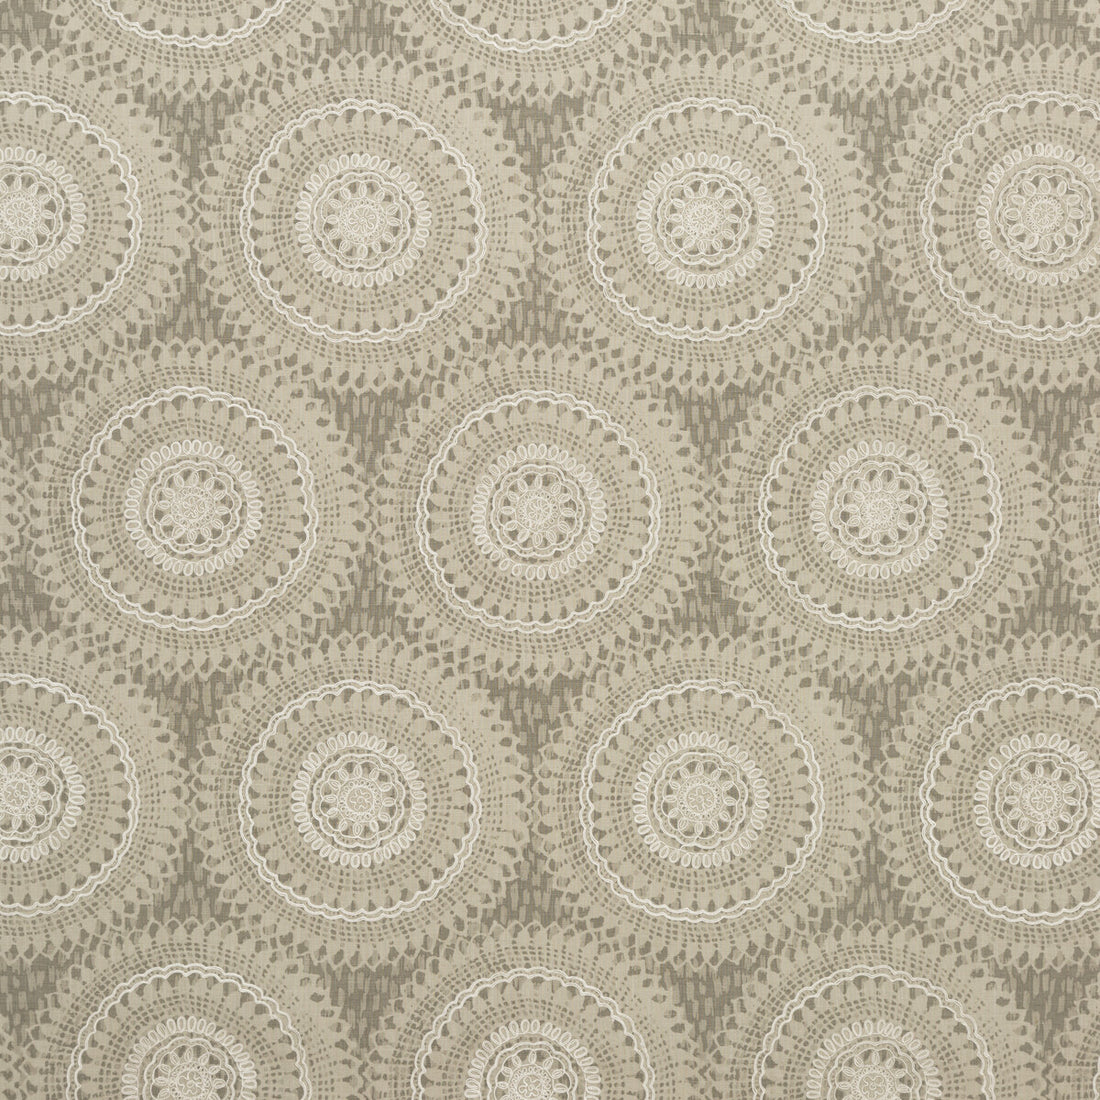 Cheriton fabric in warm grey color - pattern BP10568.4.0 - by G P &amp; J Baker in the Artisan collection